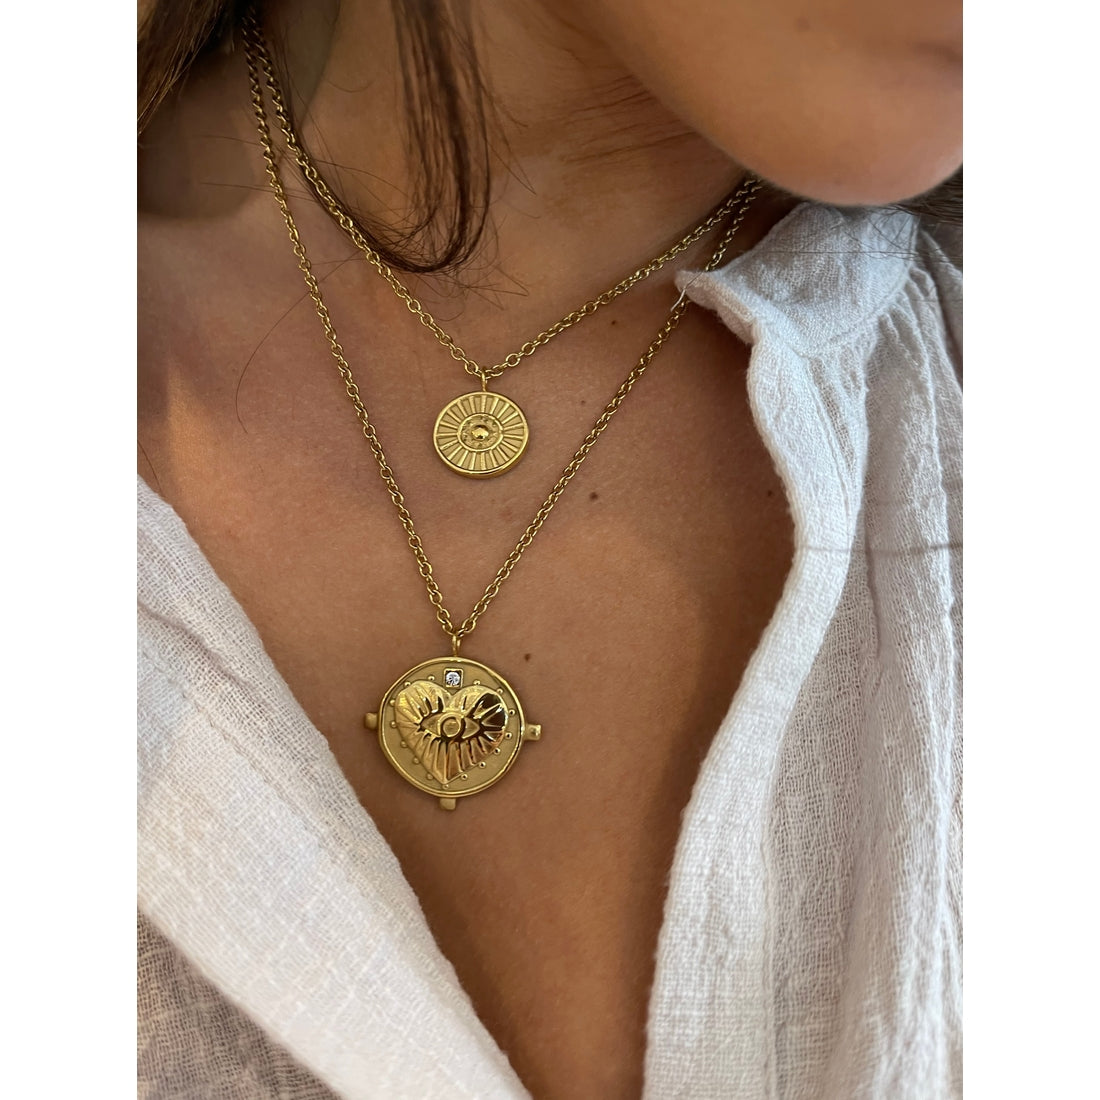 Sahira Jewelry Designs Gigi Double Coin Necklace in Gold